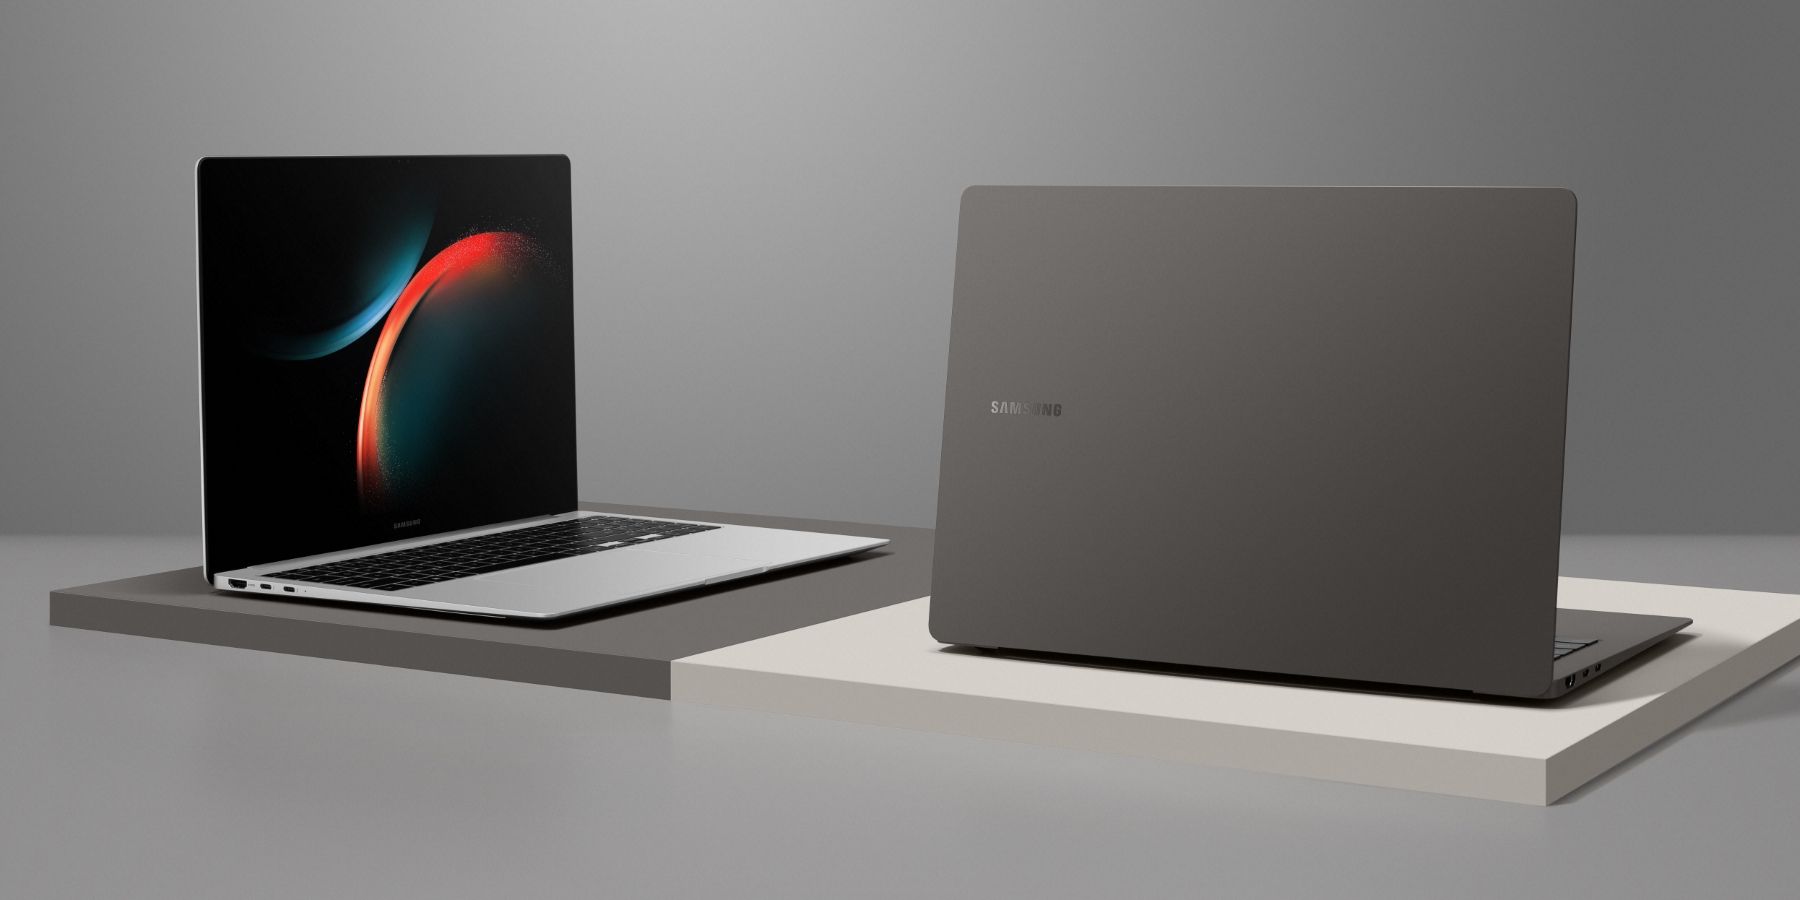 Galaxy Book 3 Pro in two color options